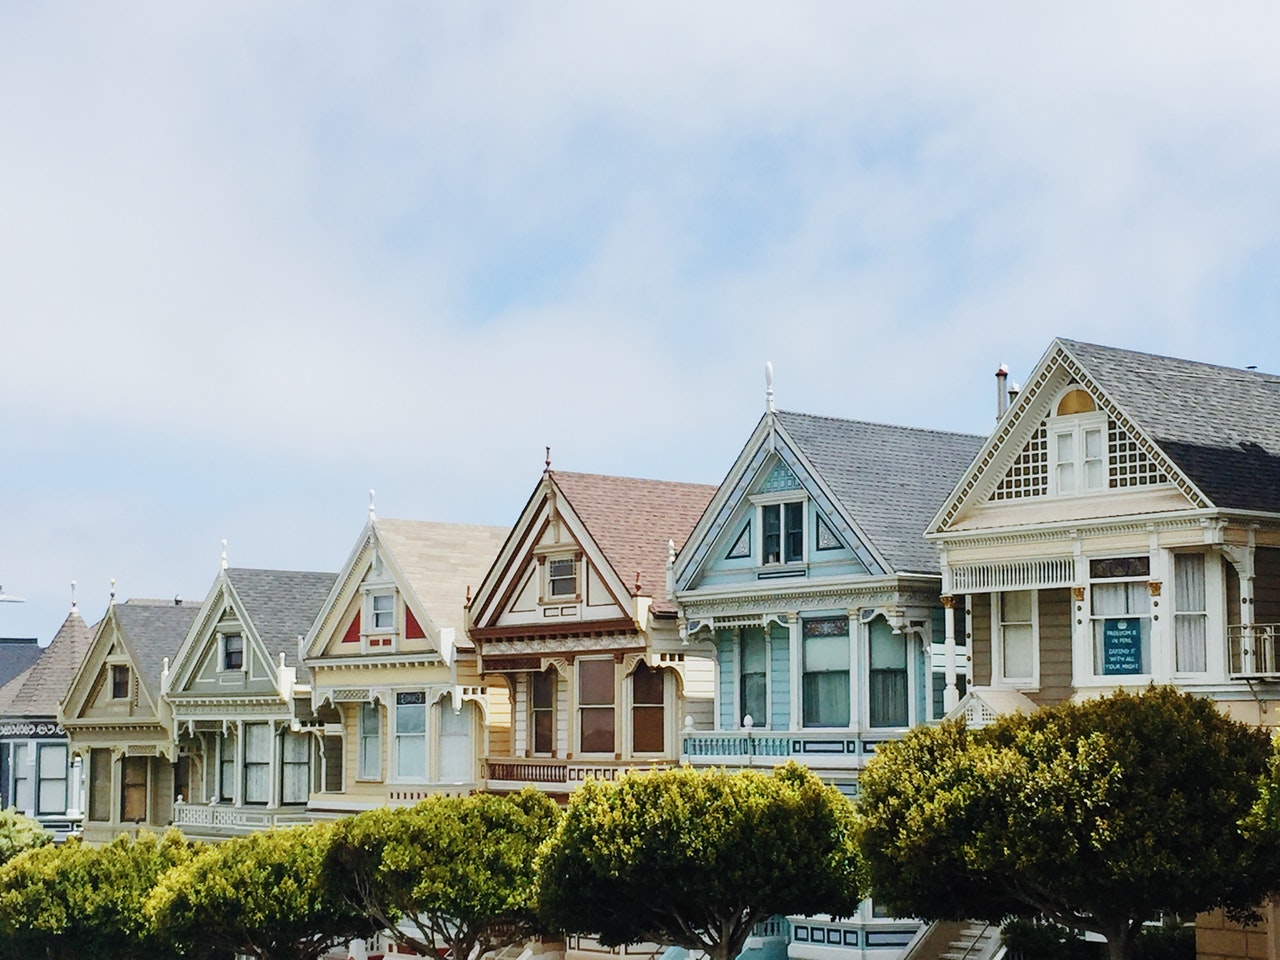 How Do You Know If It’s A Good Time To Buy A Home In The Bay Area?